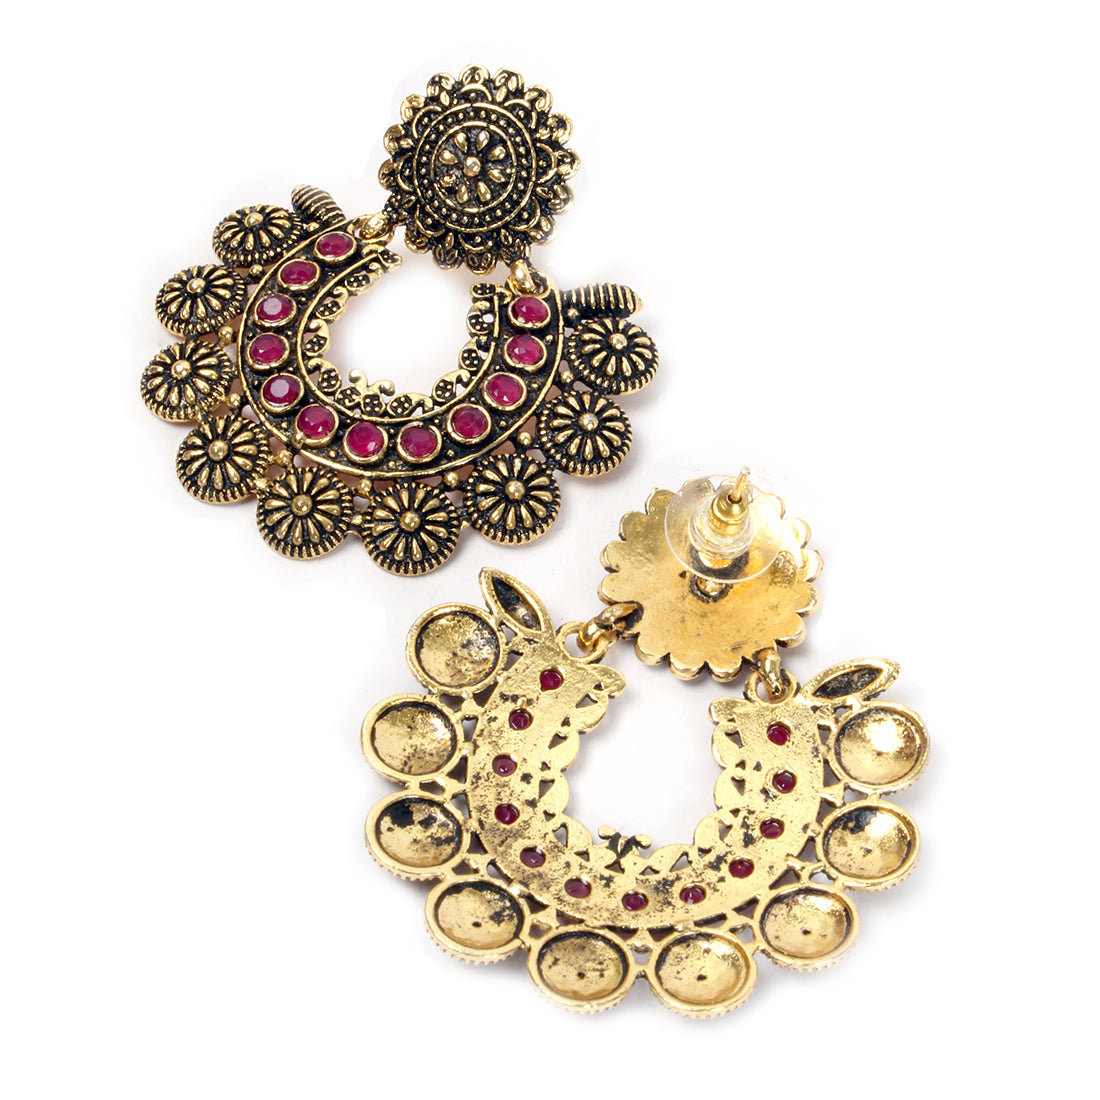 OVERSIZED HANDCRAFTED ETHNIC GOLD-TONED RED RHINESTONE STUDDED DROP EARRINGS